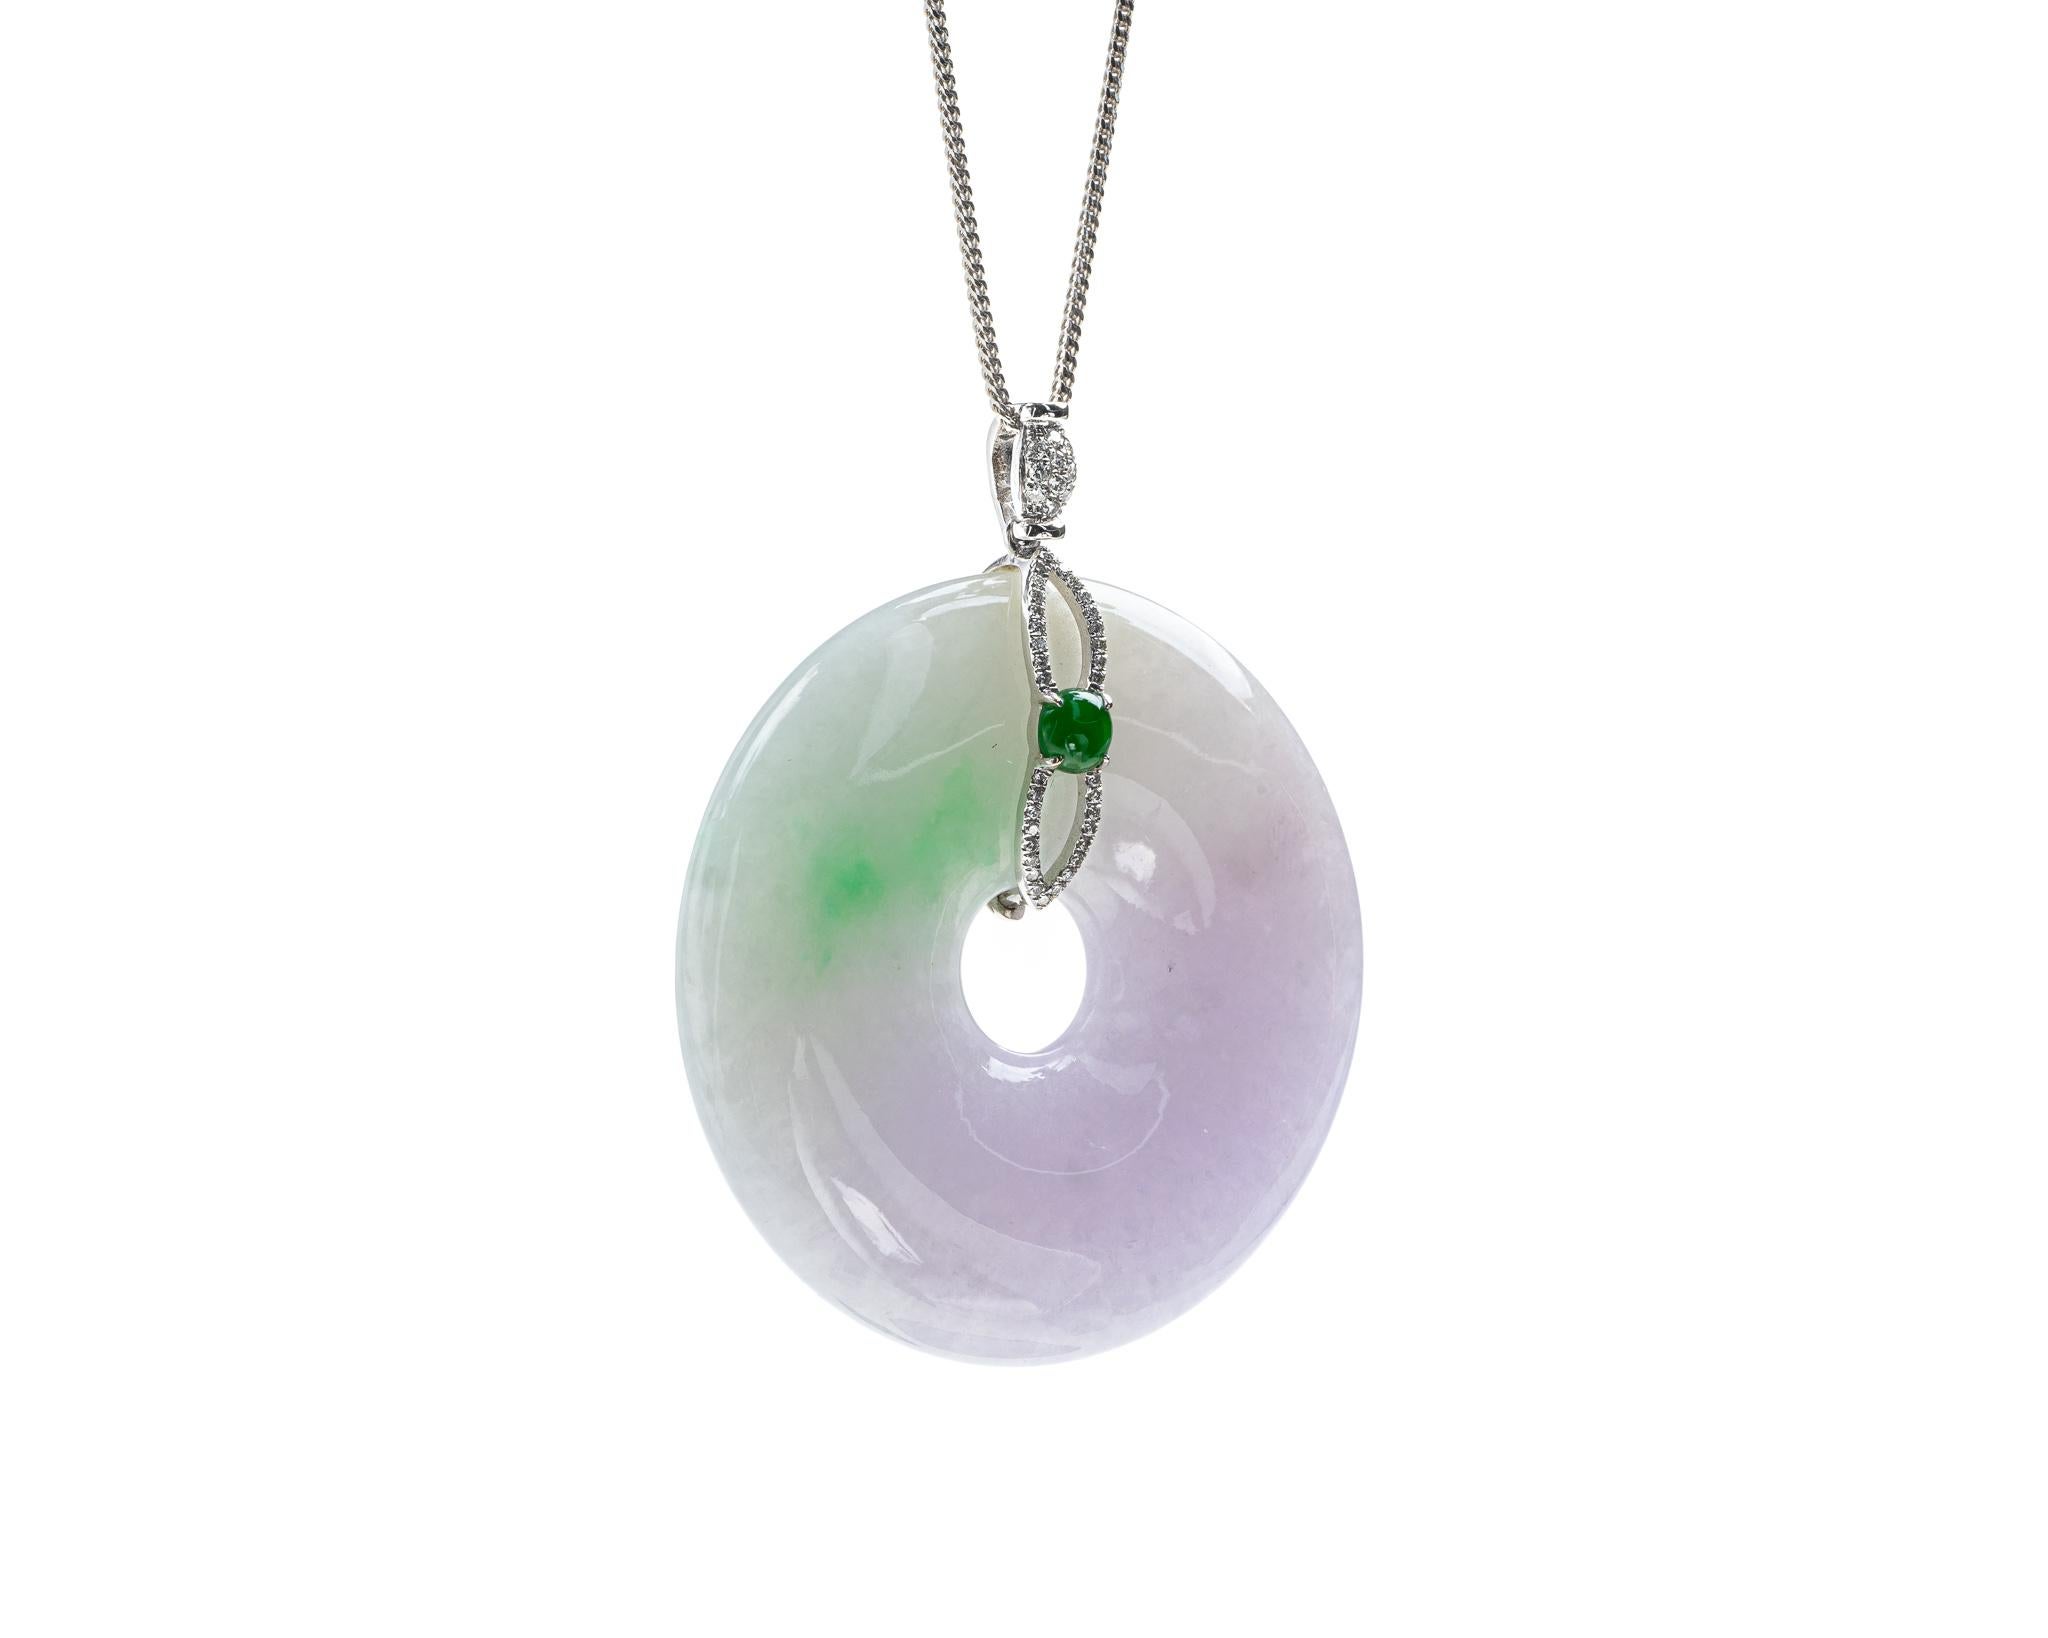 This is an all natural, untreated jadeite jade carved pi disc and diamond pendant set on an 18K white gold and diamond bail.  The carved pi disc symbolizes peace.  
 
It measures 2.05 inches (52.1 mm) x 1.70 inches (43.3 mm) with thickness of 0.30